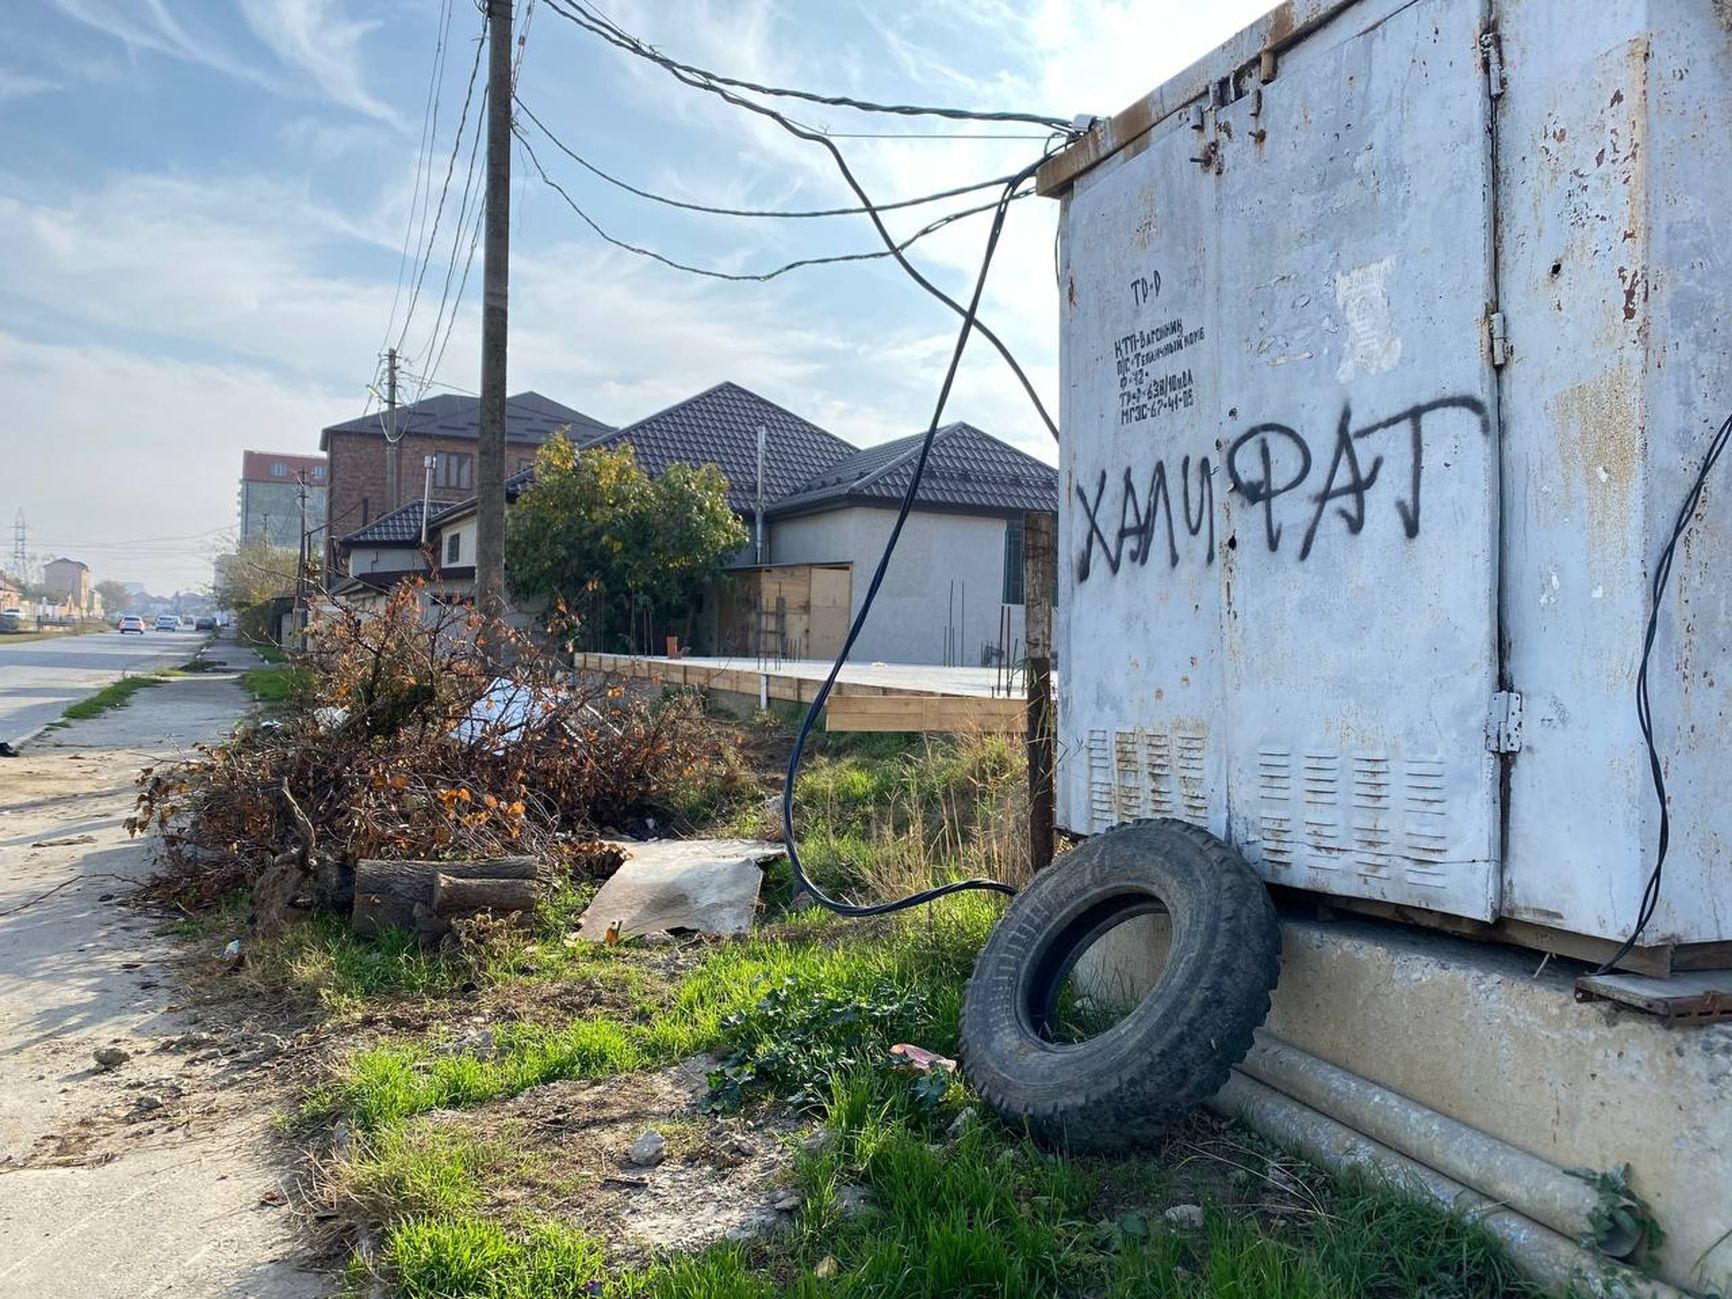 “Caliphate” and “Islamic Caliphate” graffiti appear on buildings, fences, and transformers in and outside Makhachkala